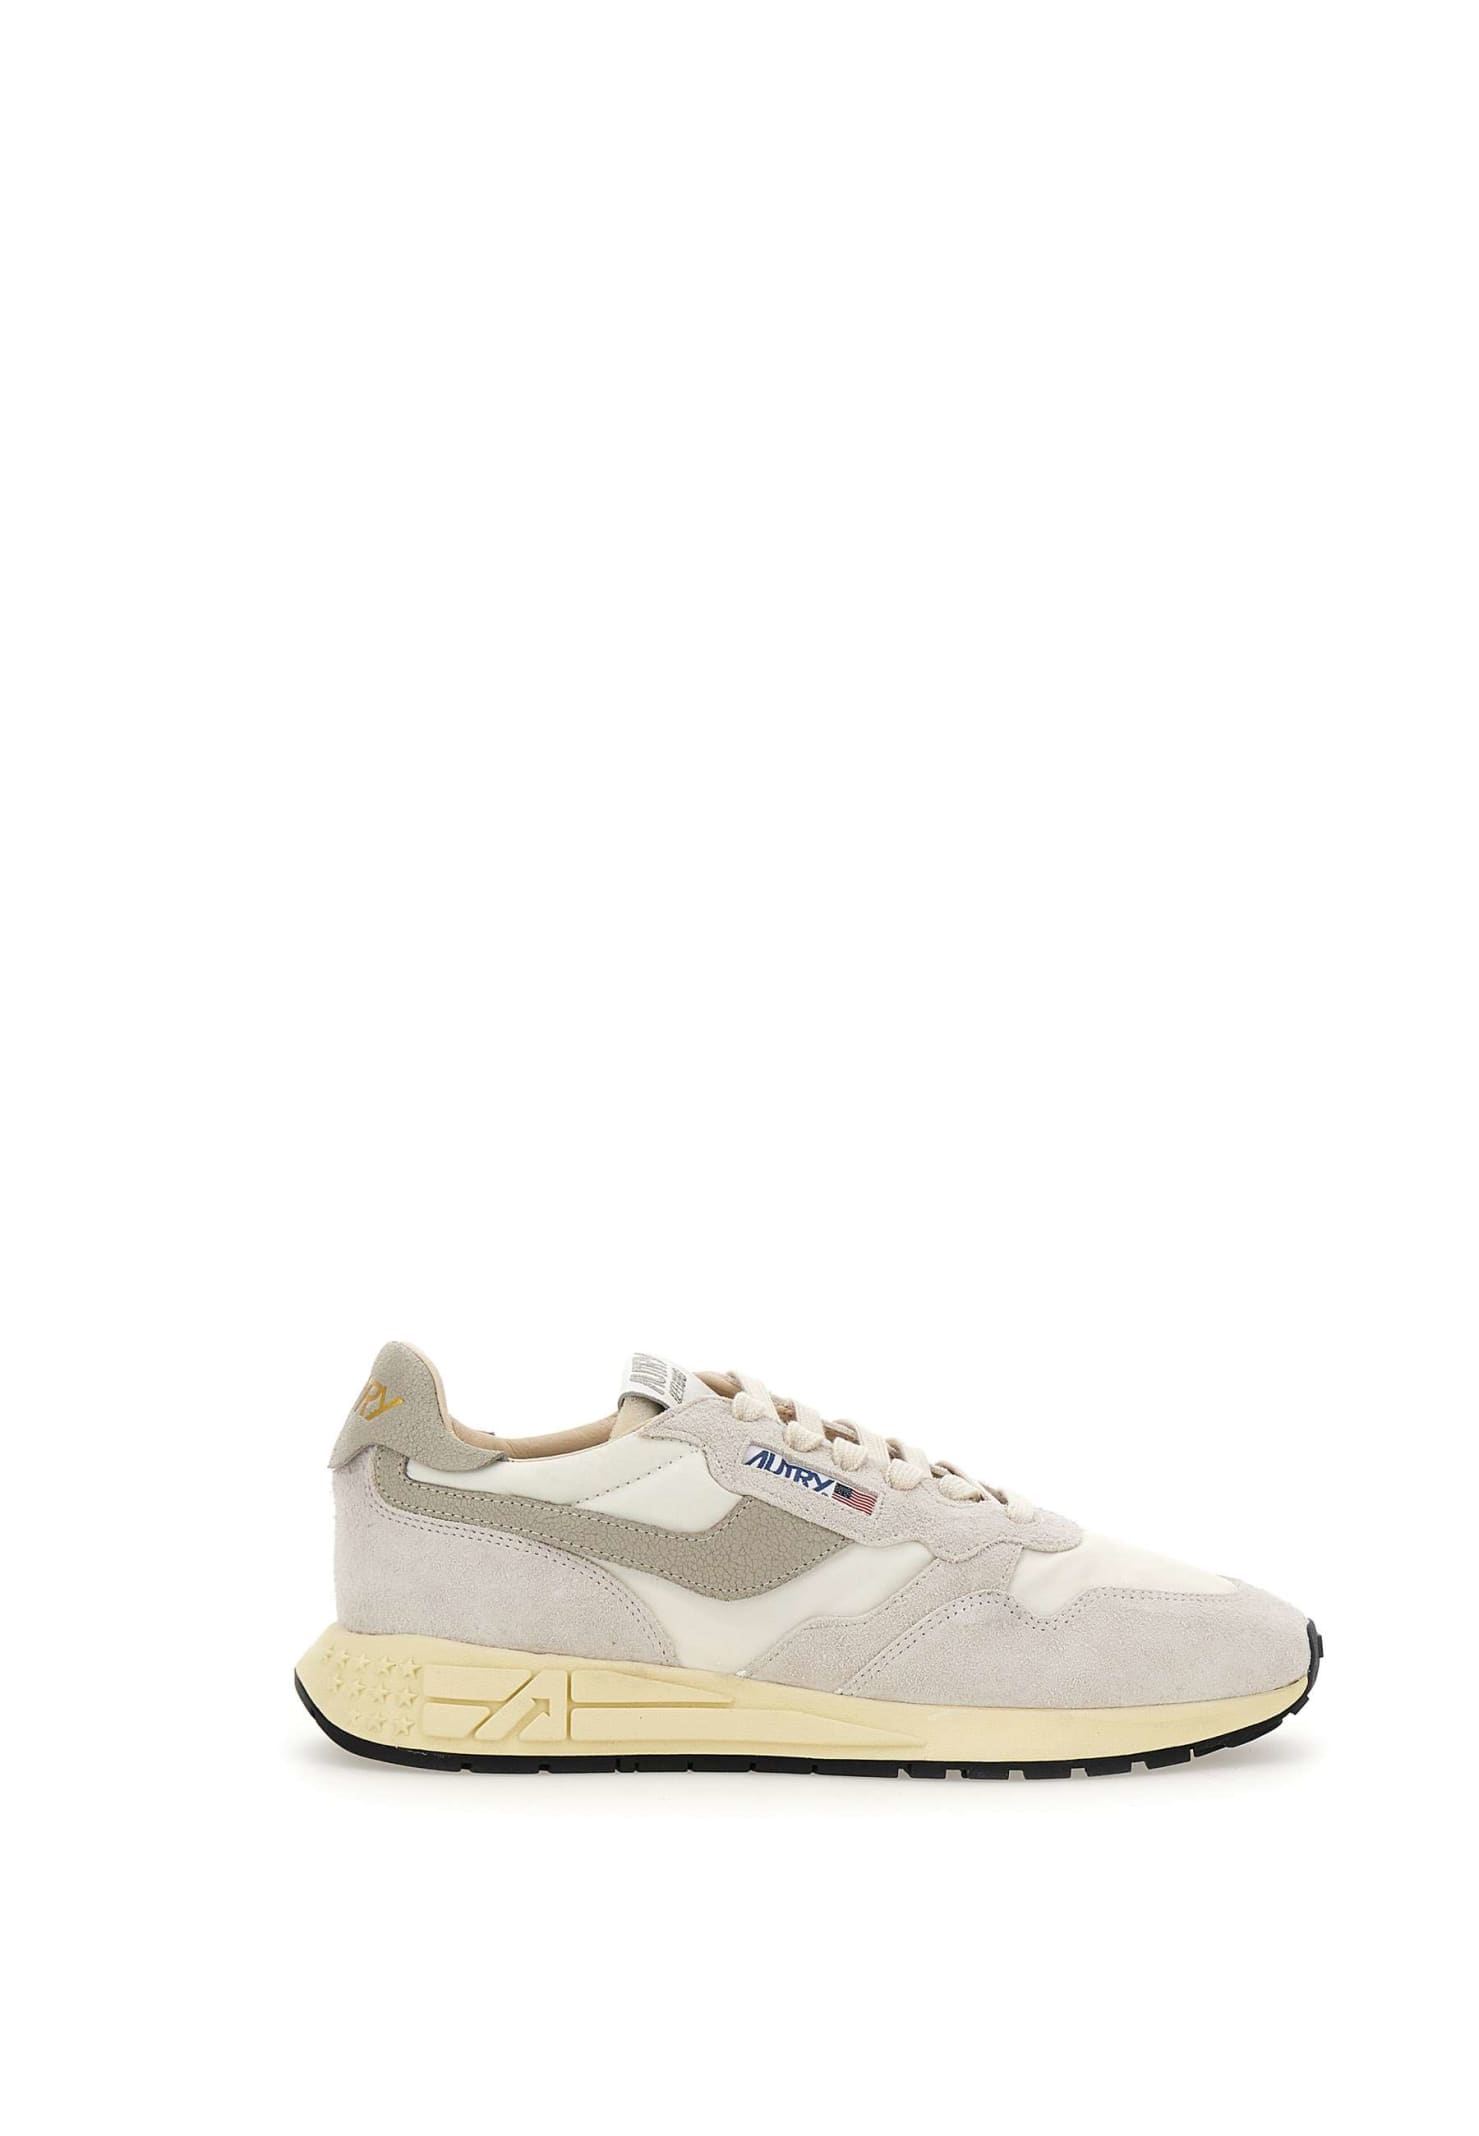 Autry Wwlm Nc04 Sneakers In White/grey